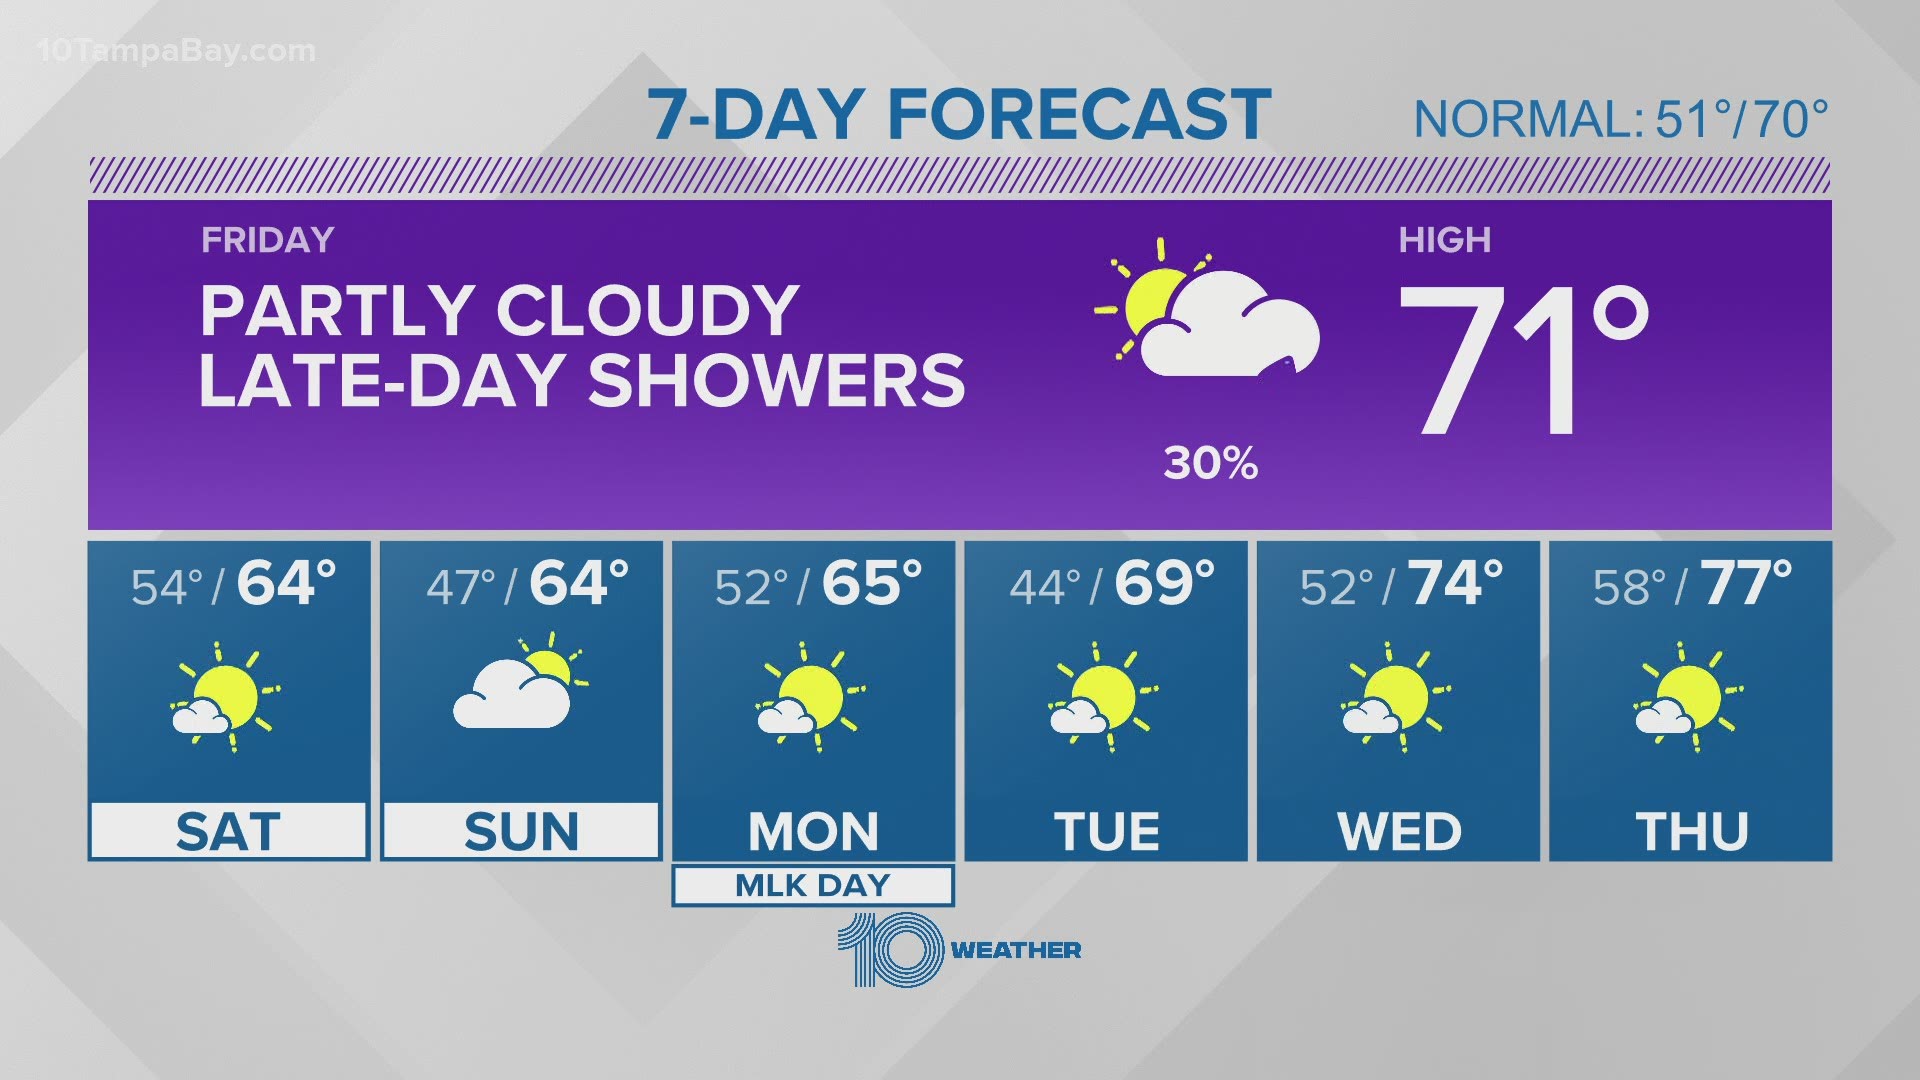 Showers are expected late today before things cool down this weekend.